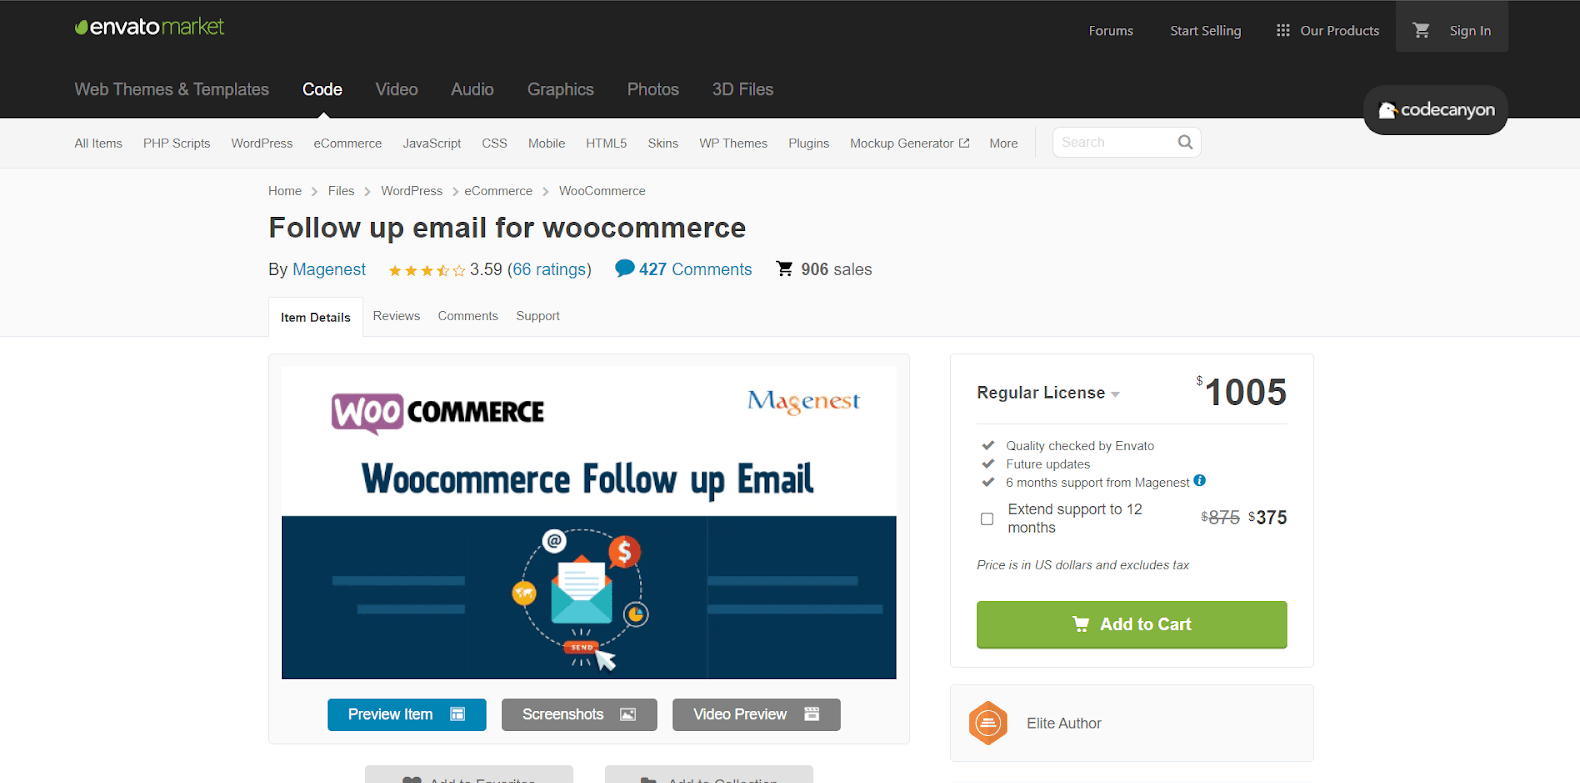 Follow Up Email for WooCommerce